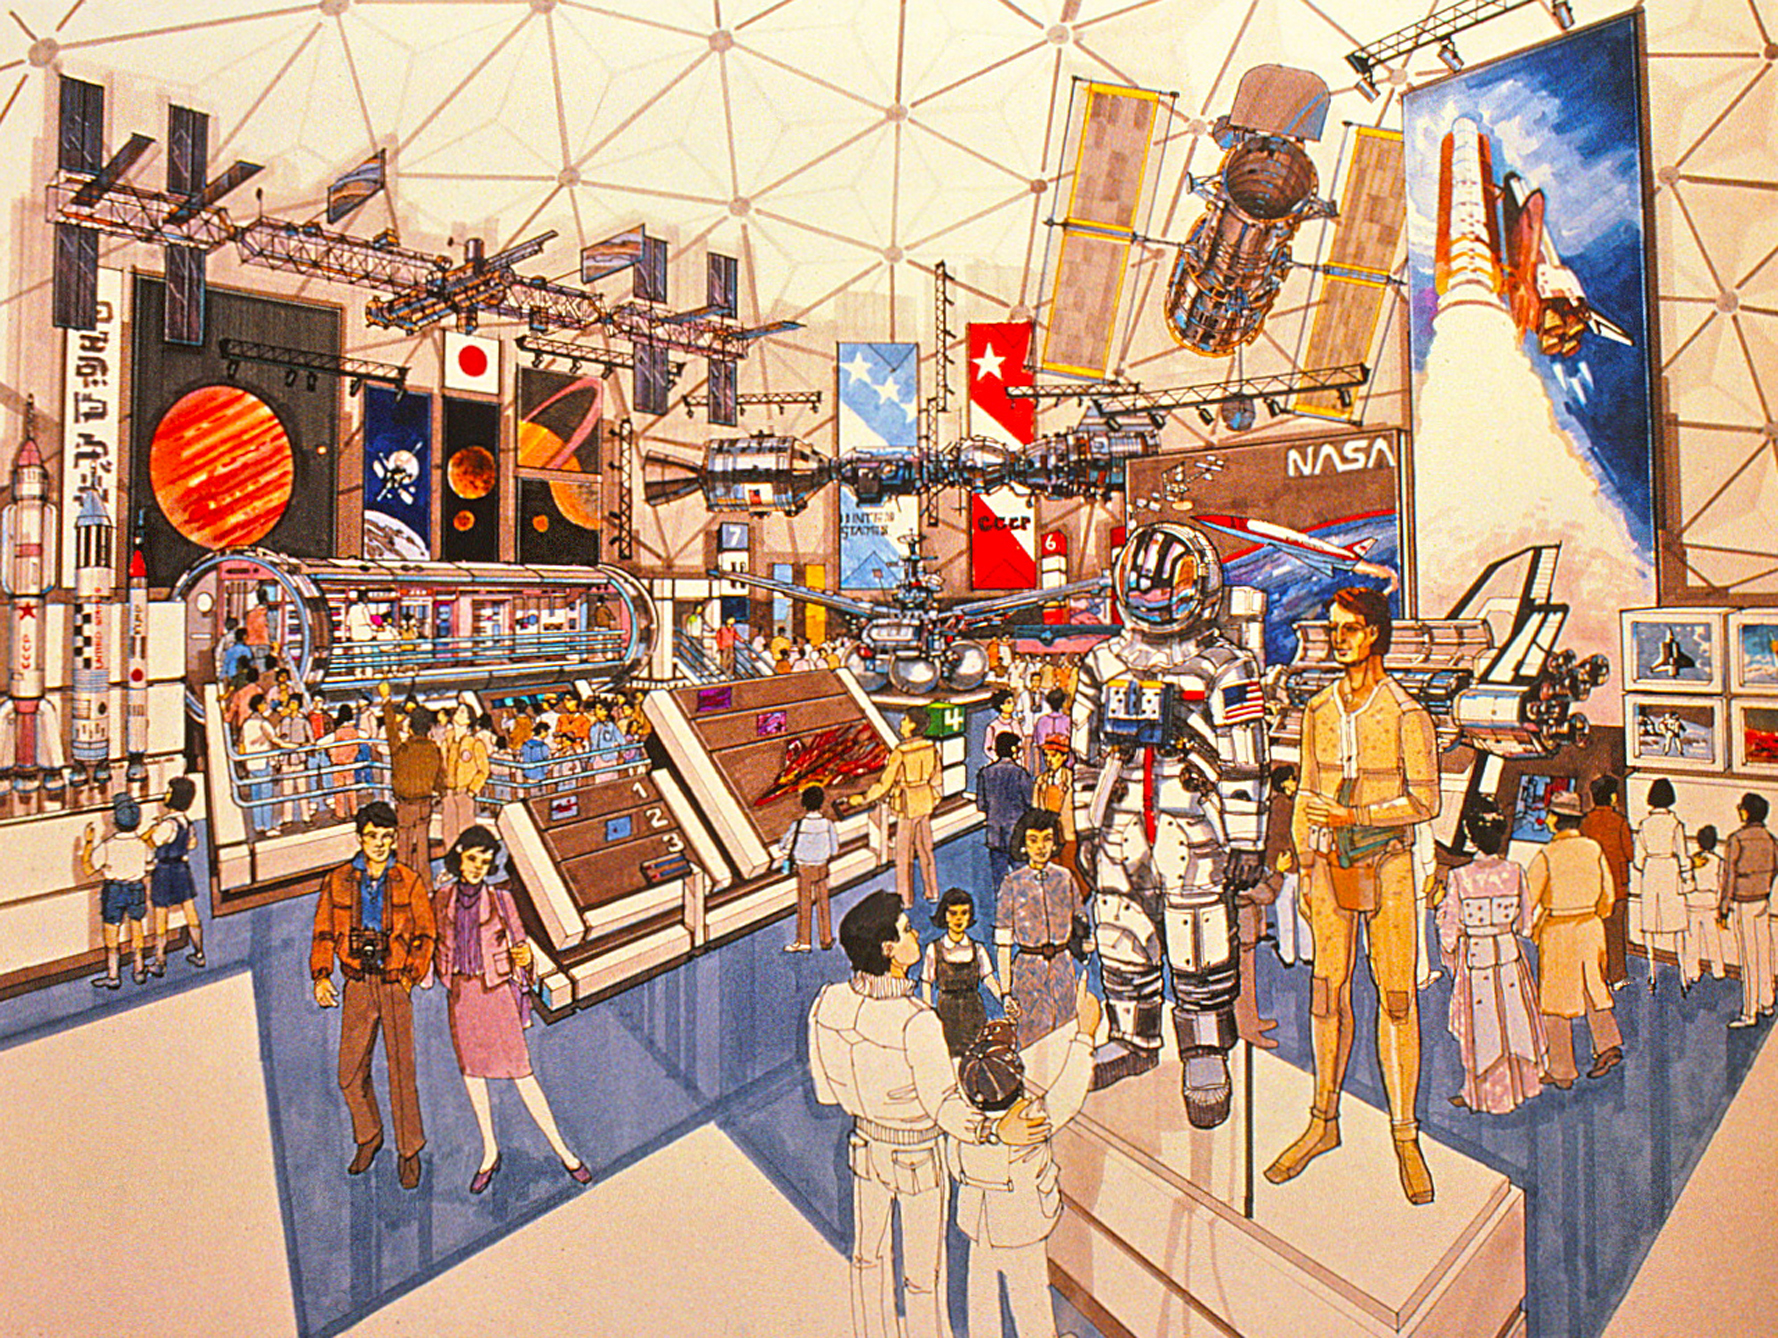 Concept marker drawing by Alex Sarkis showing people viewing the exhibit inside the dome.